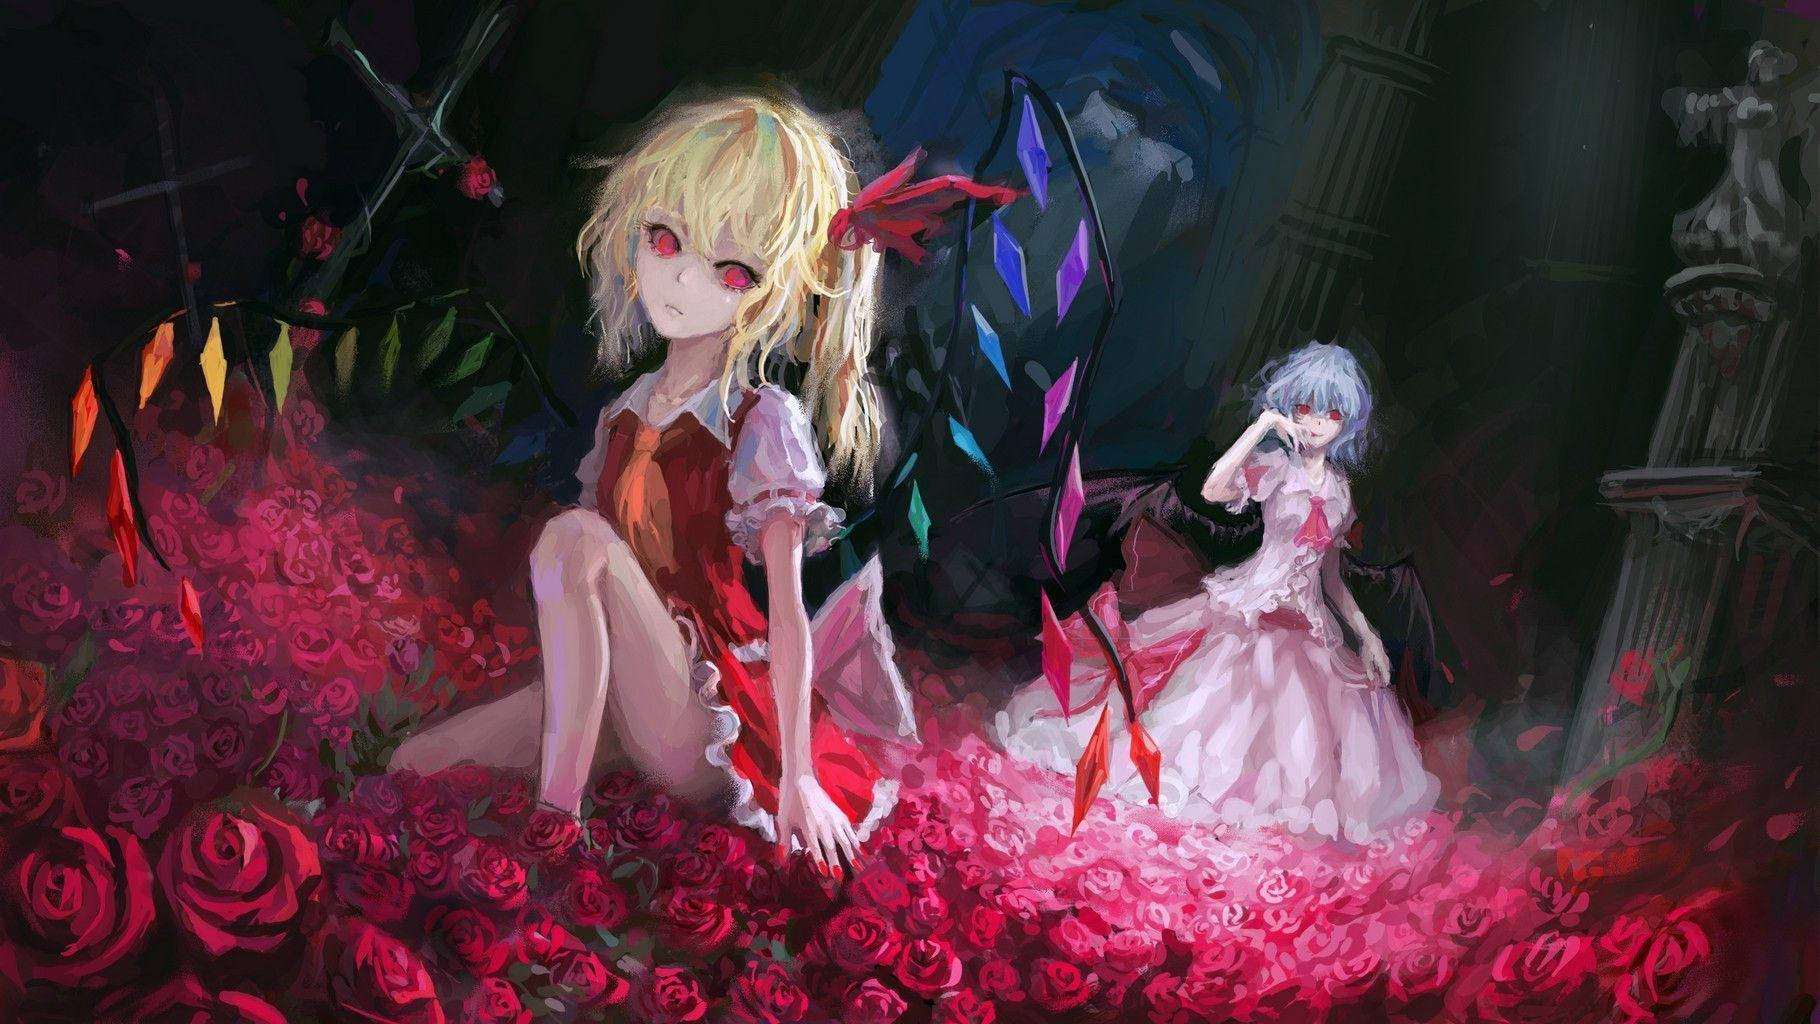 Flandre And Remilia On Roses Wallpaper